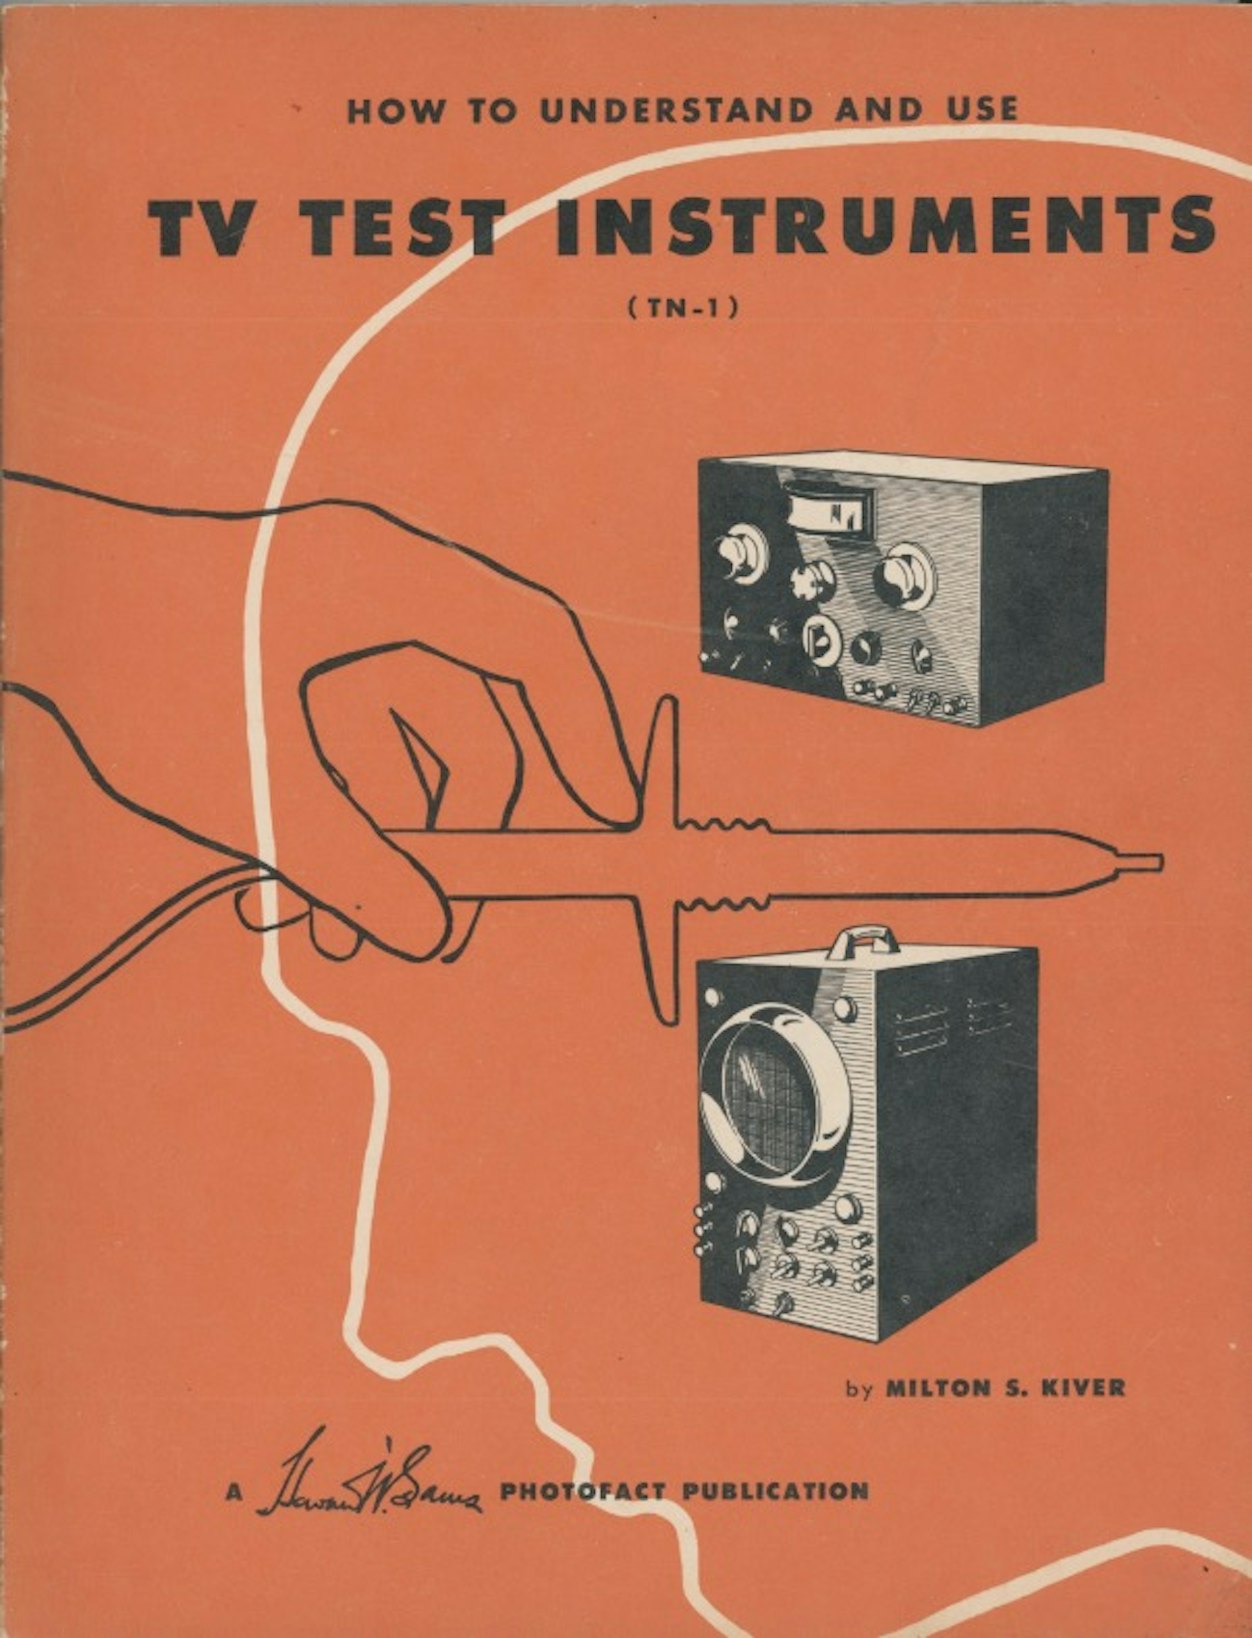 How To Understand and Use TV Test Instruments